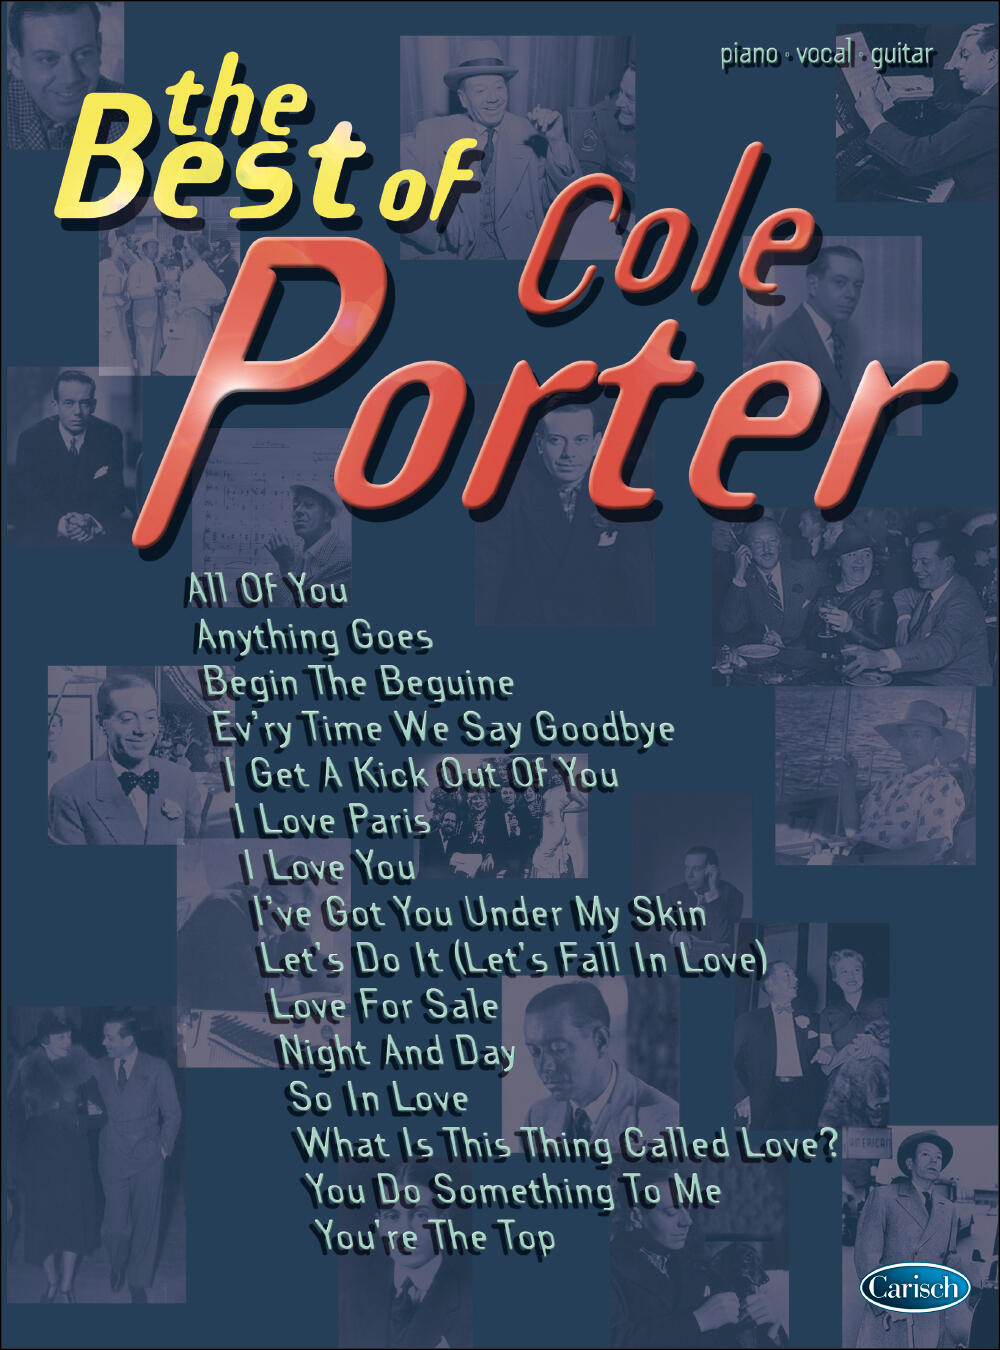 The Best of Cole Porter : photo 1